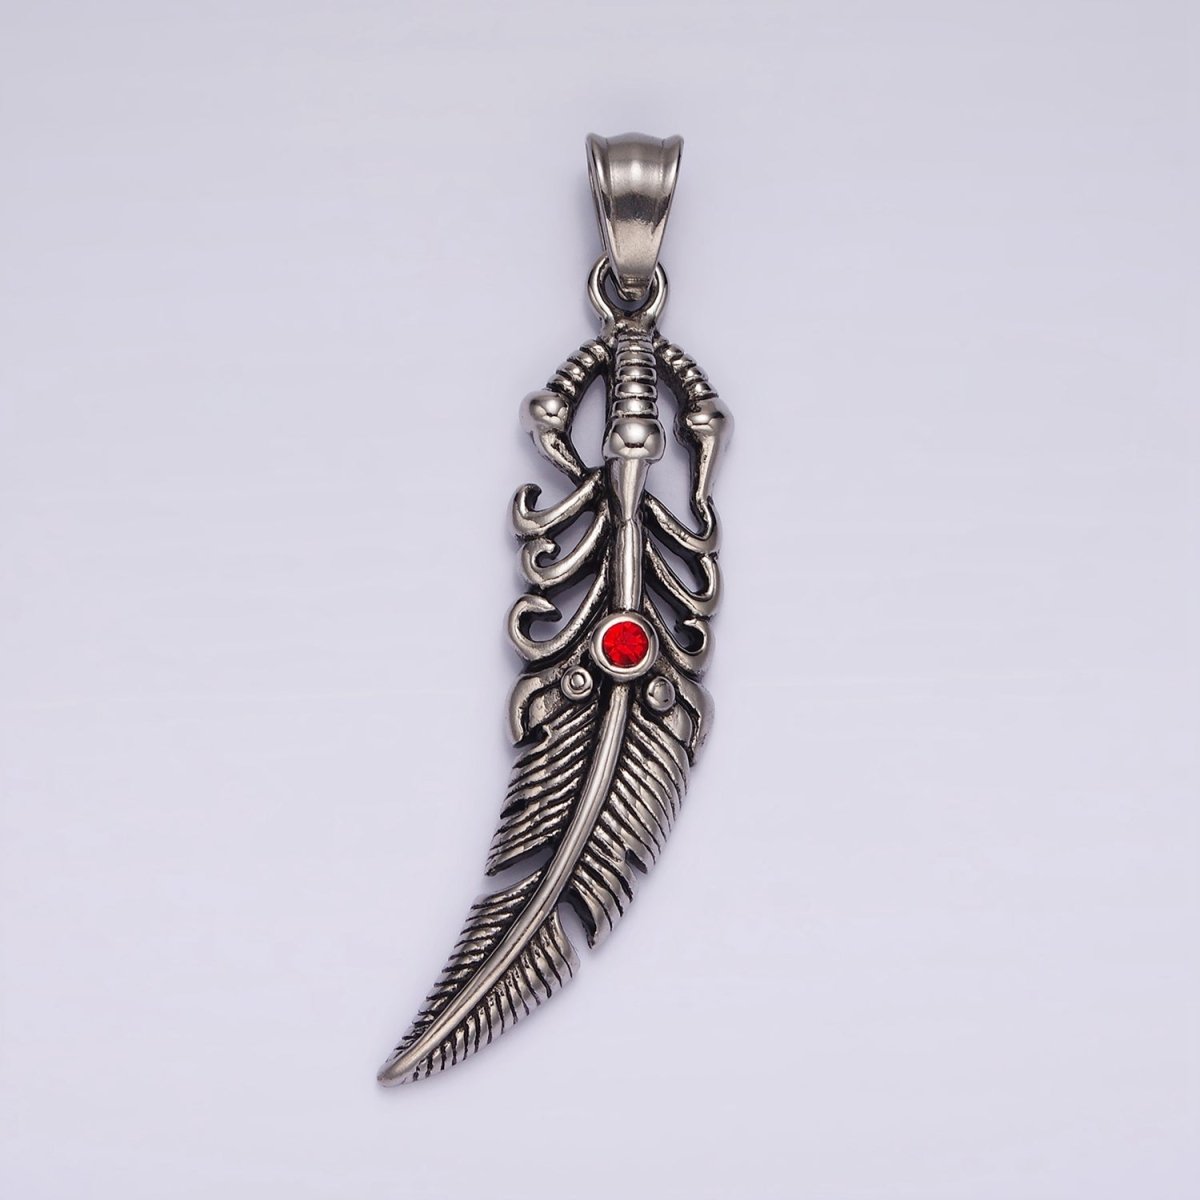 Stainless Steel 63mm Feather Charm Red Eye Long Statement Boho Oxidized Pendant | P871 - DLUXCA